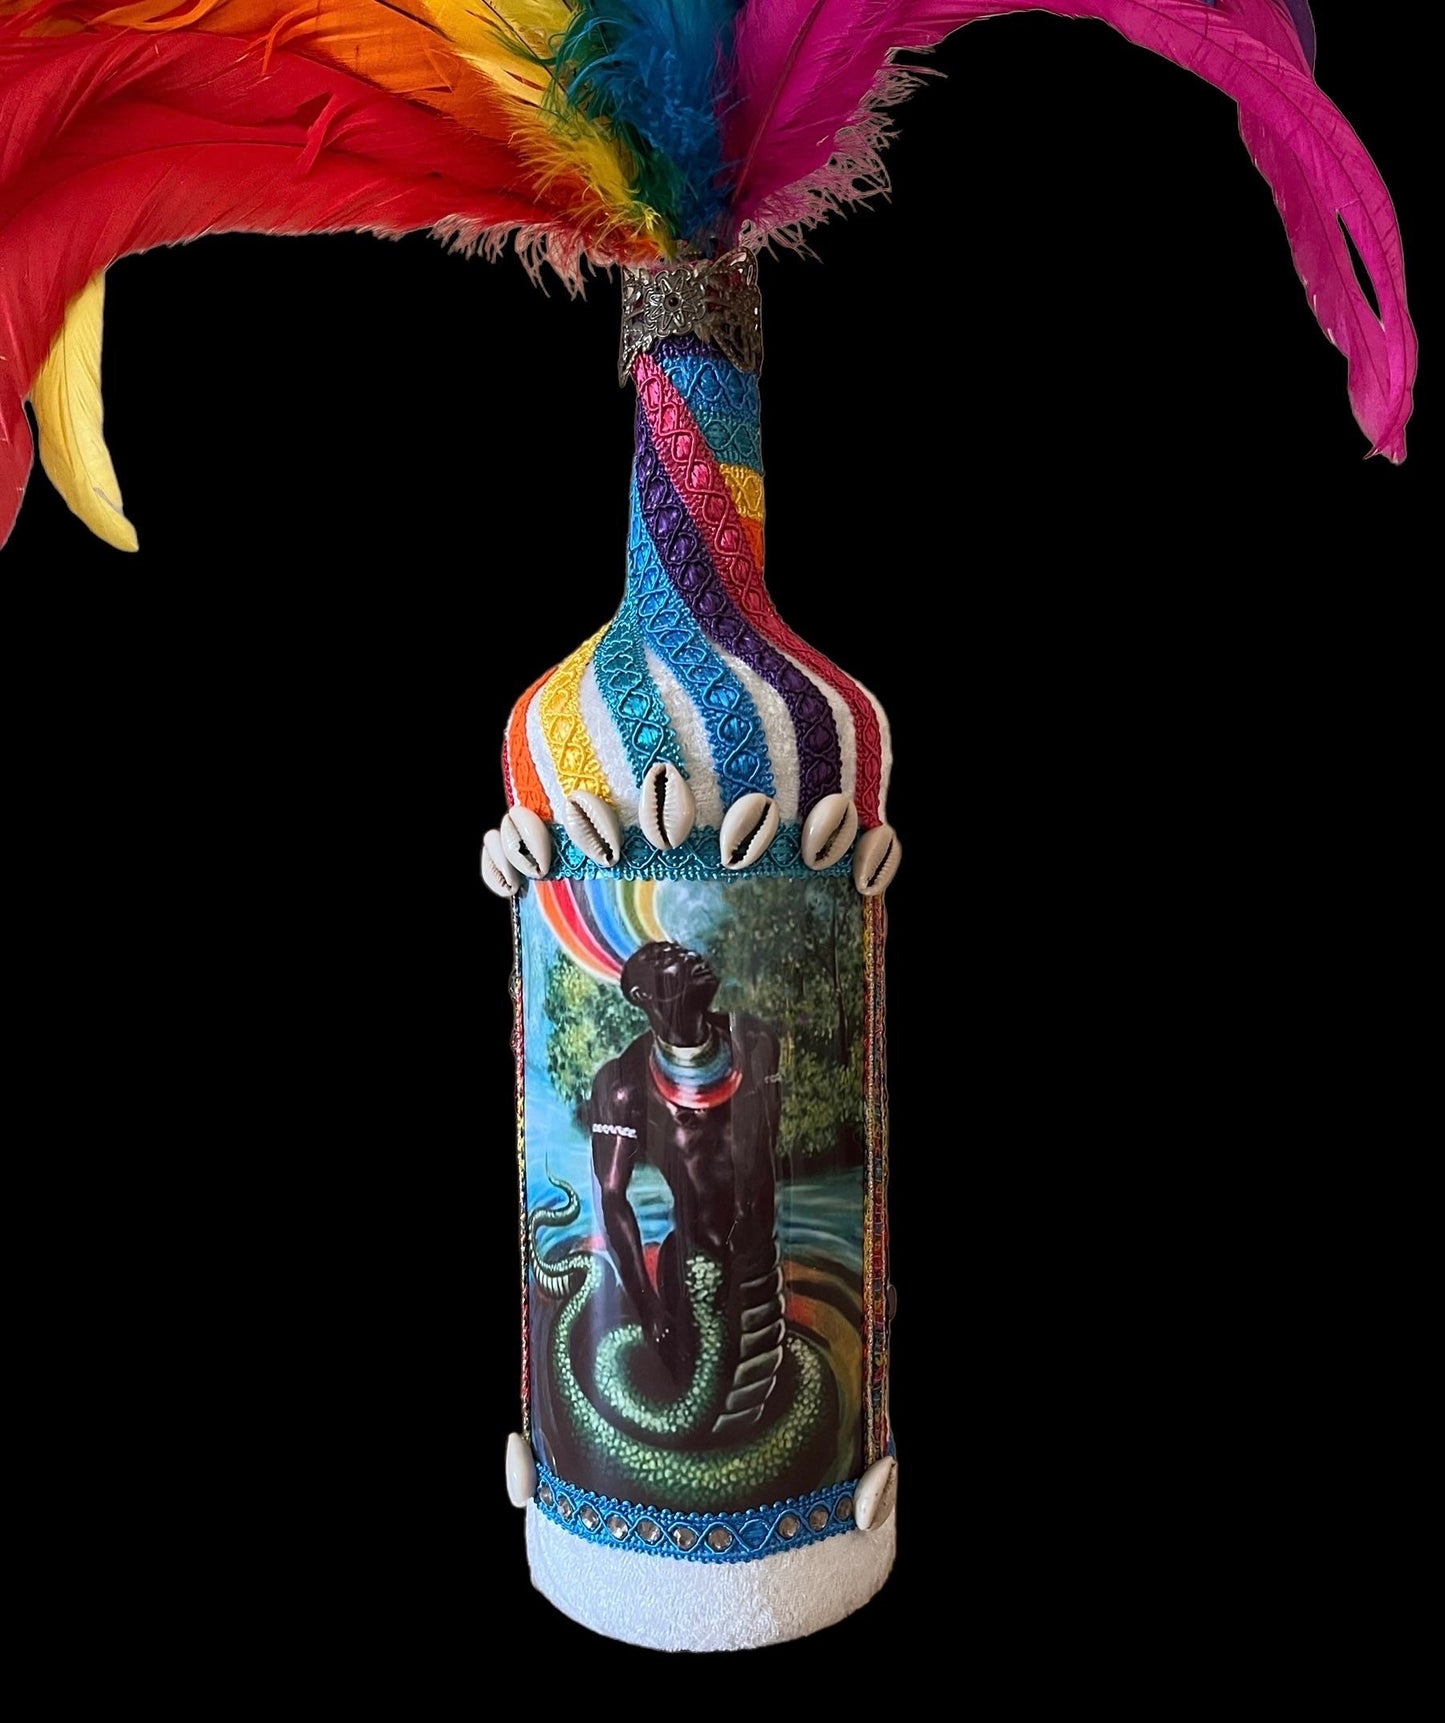 Large Damballah or Osumare Boutey / Bottle + Blessed + Made by Lukumi & Haitian Vodou Initiate + Spiritual Art + One of a Kind